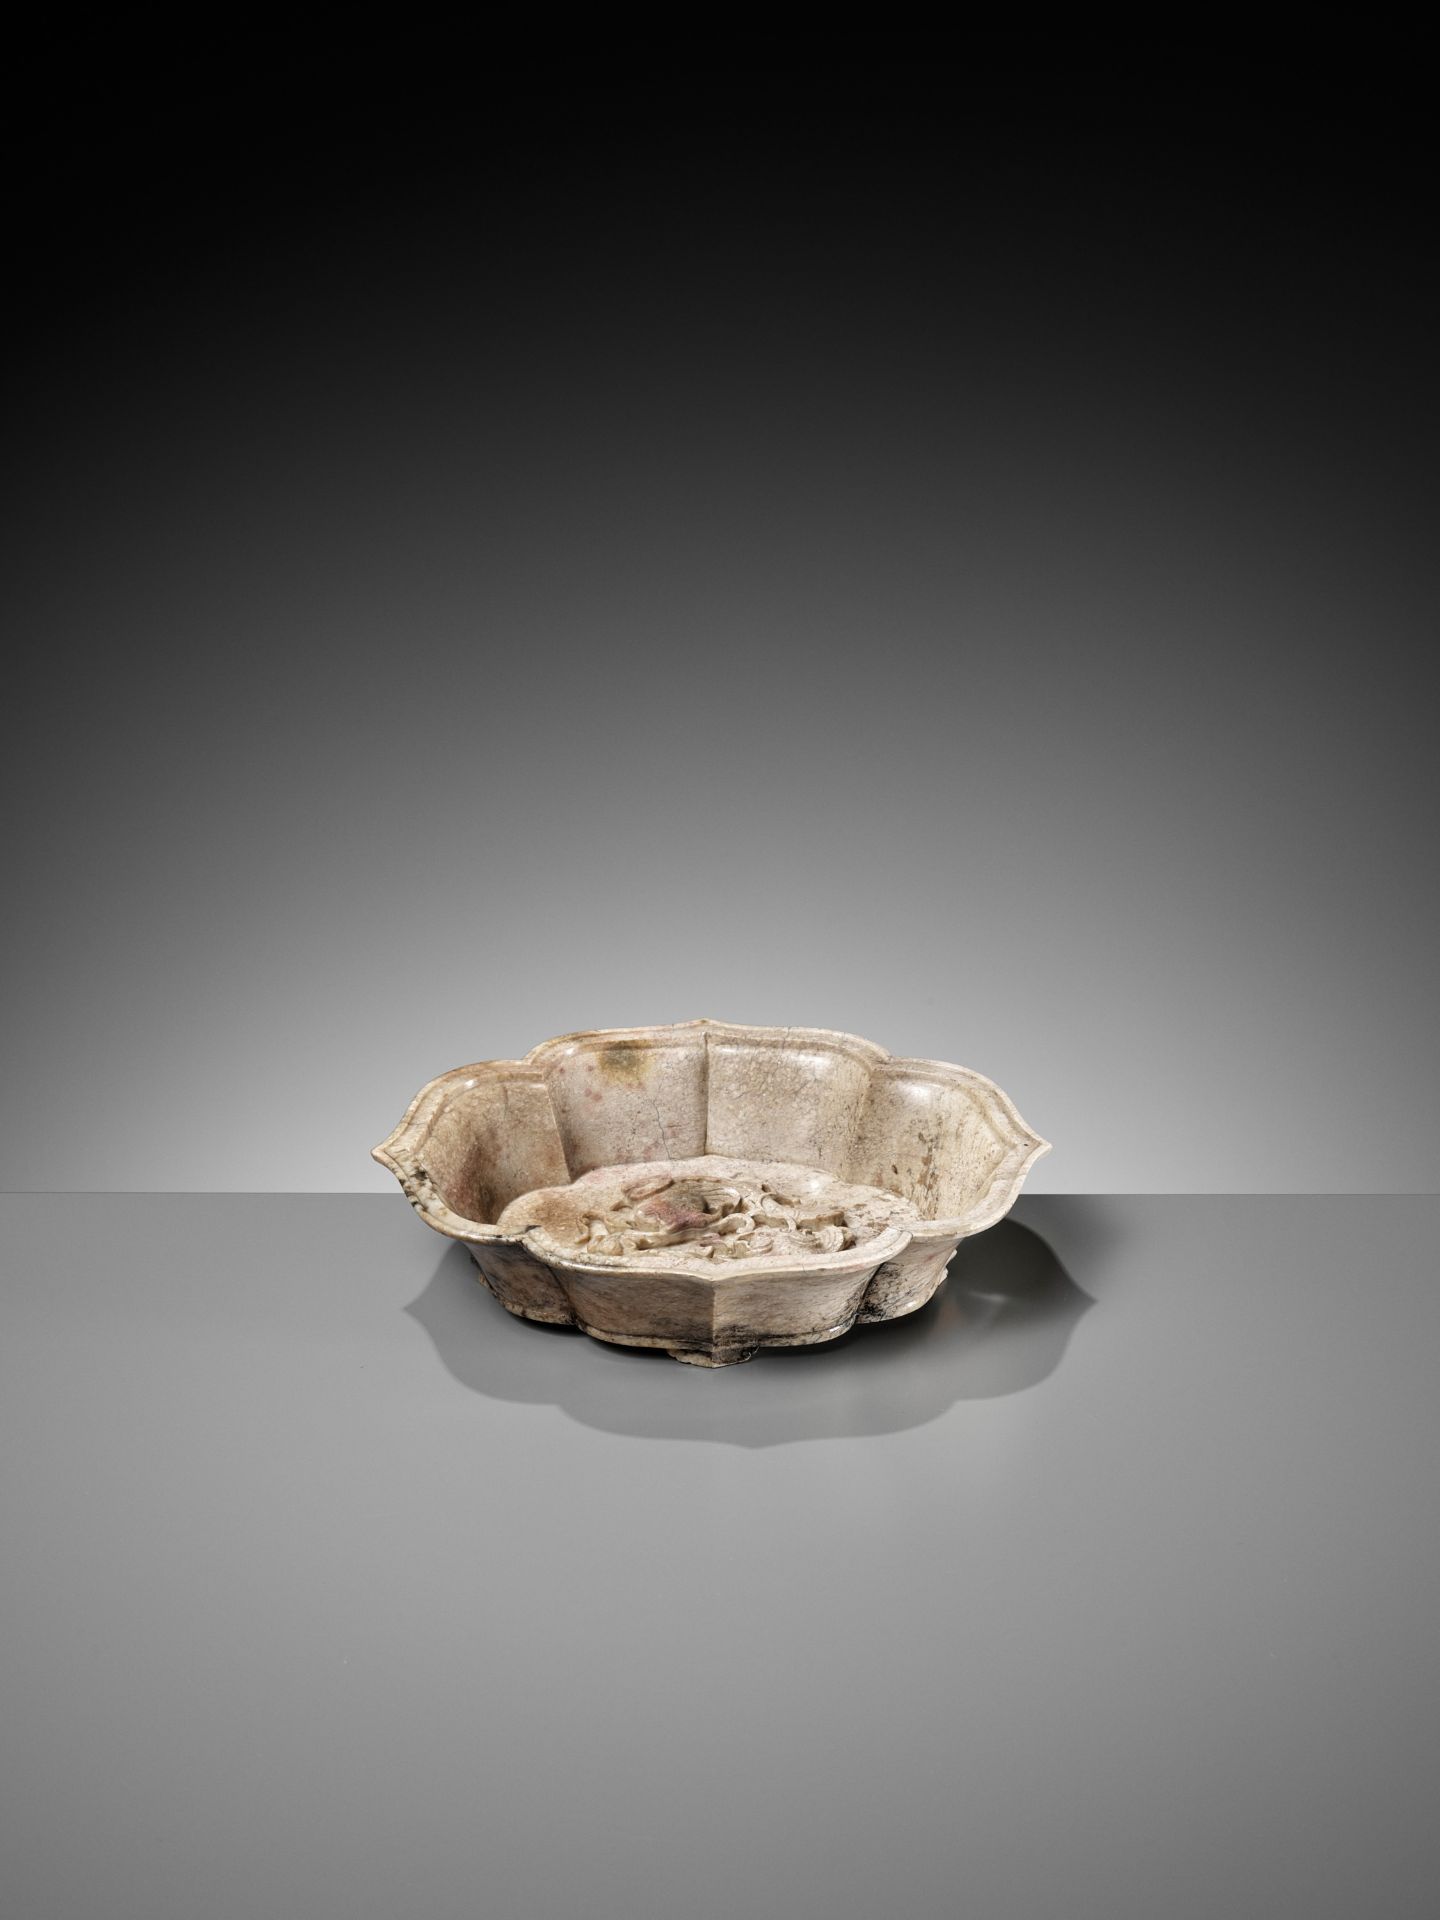 A CHICKEN BONE JADE 'DOUBLE FISH' MARRIAGE BOWL, 17TH-18TH CENTURY - Image 8 of 16